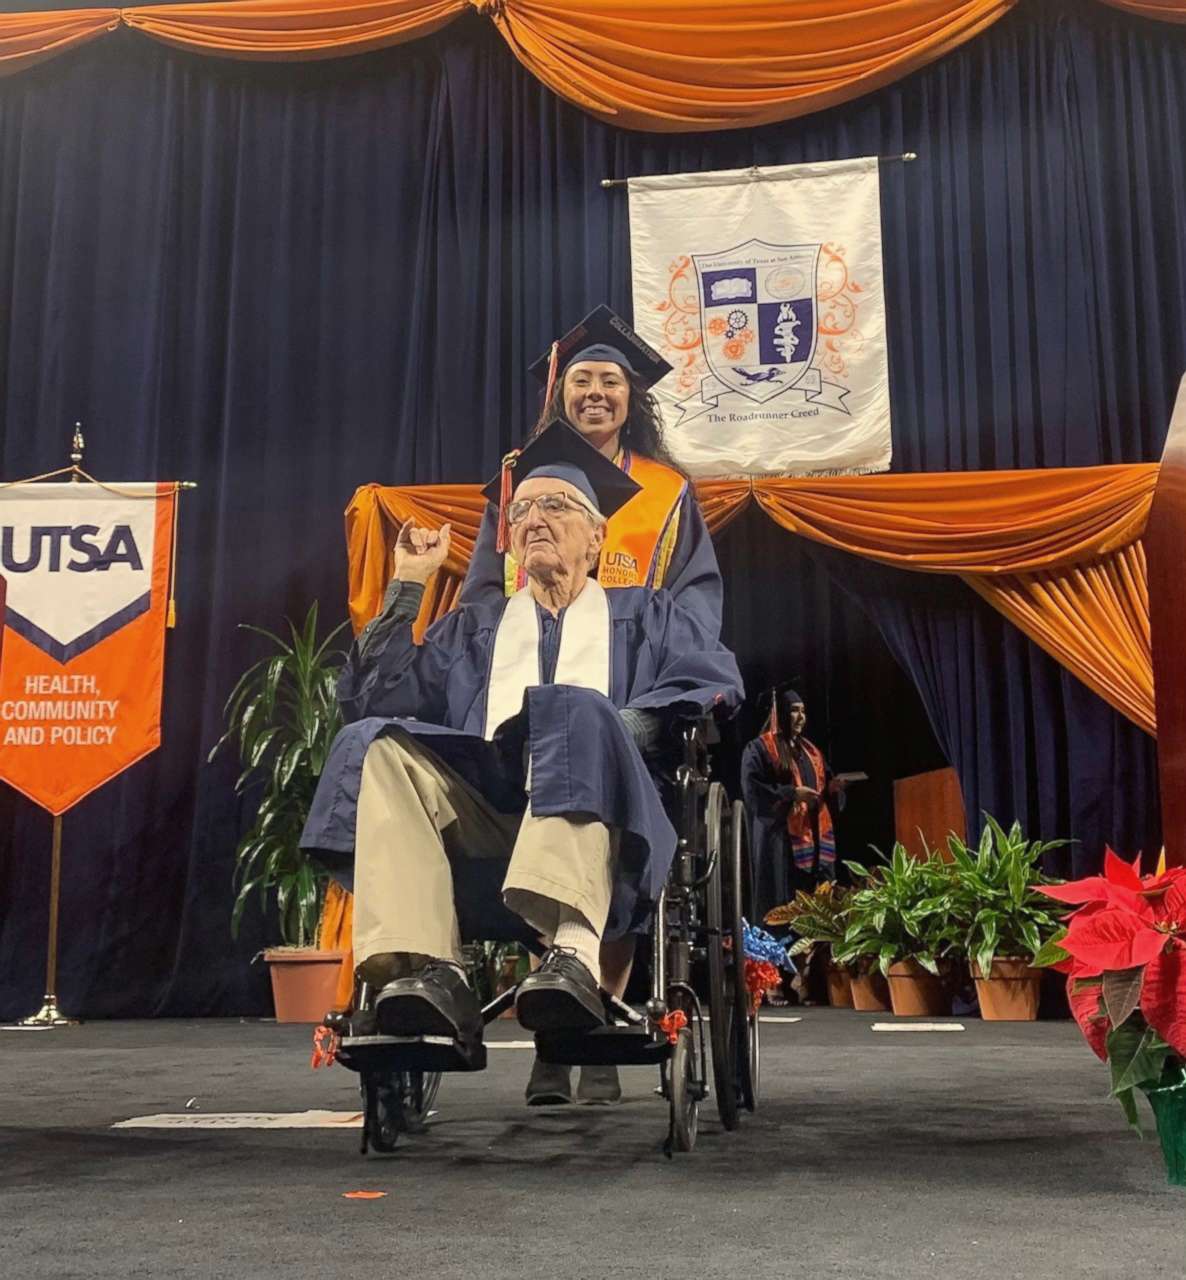 PHOTO: Melanie Salazar, 23, and her grandfather, Rene Neira, 87, graduated together from the University of Texas at San Antonio on Dec. 11, 2021.